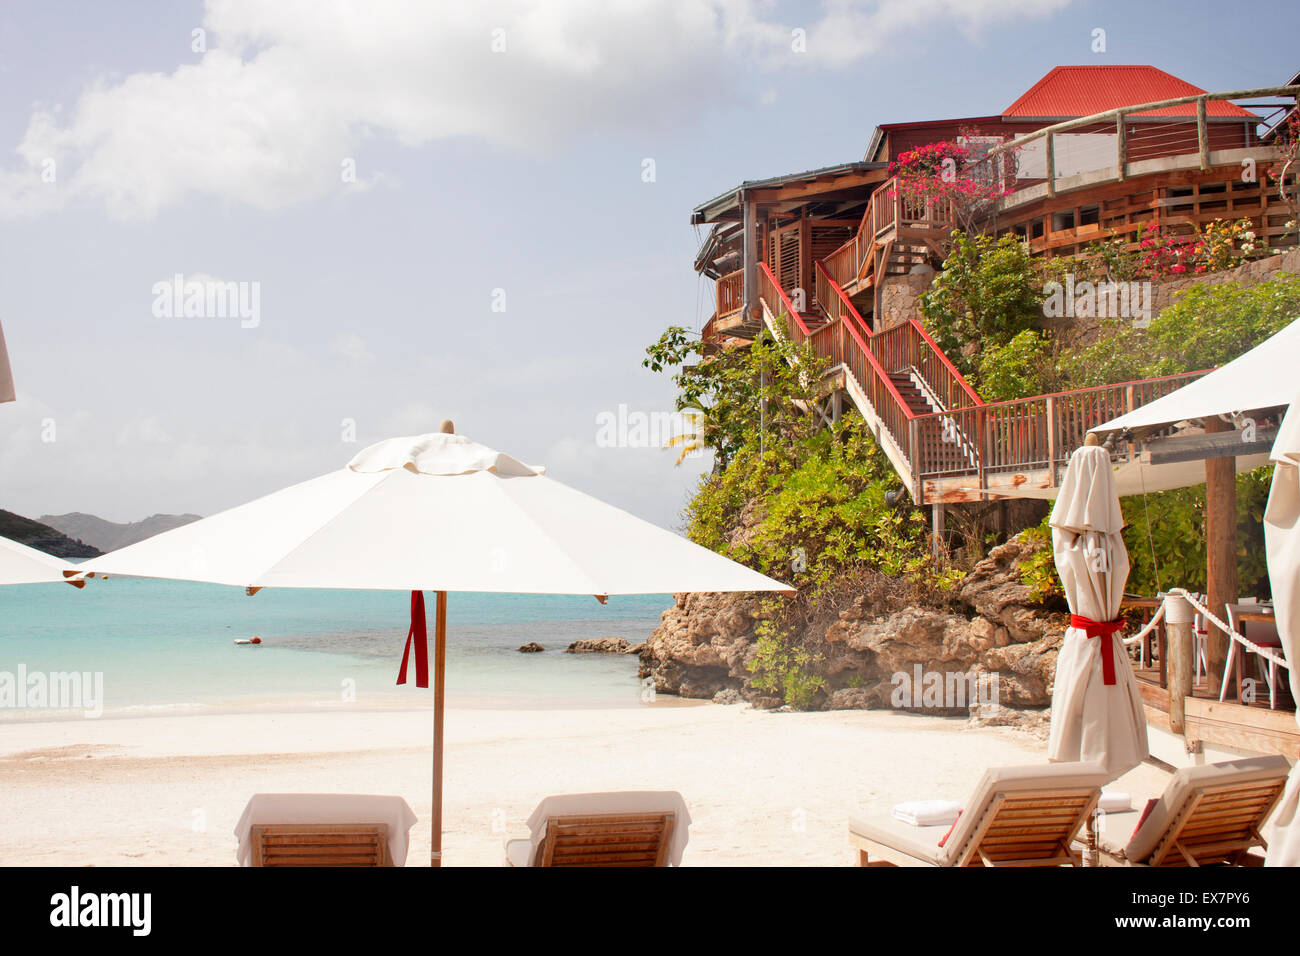 A view of St. Jean Beach, a parasol umbrella, beach chairs and the famous Eden Rock Hotel, in St. Barts Stock Photo